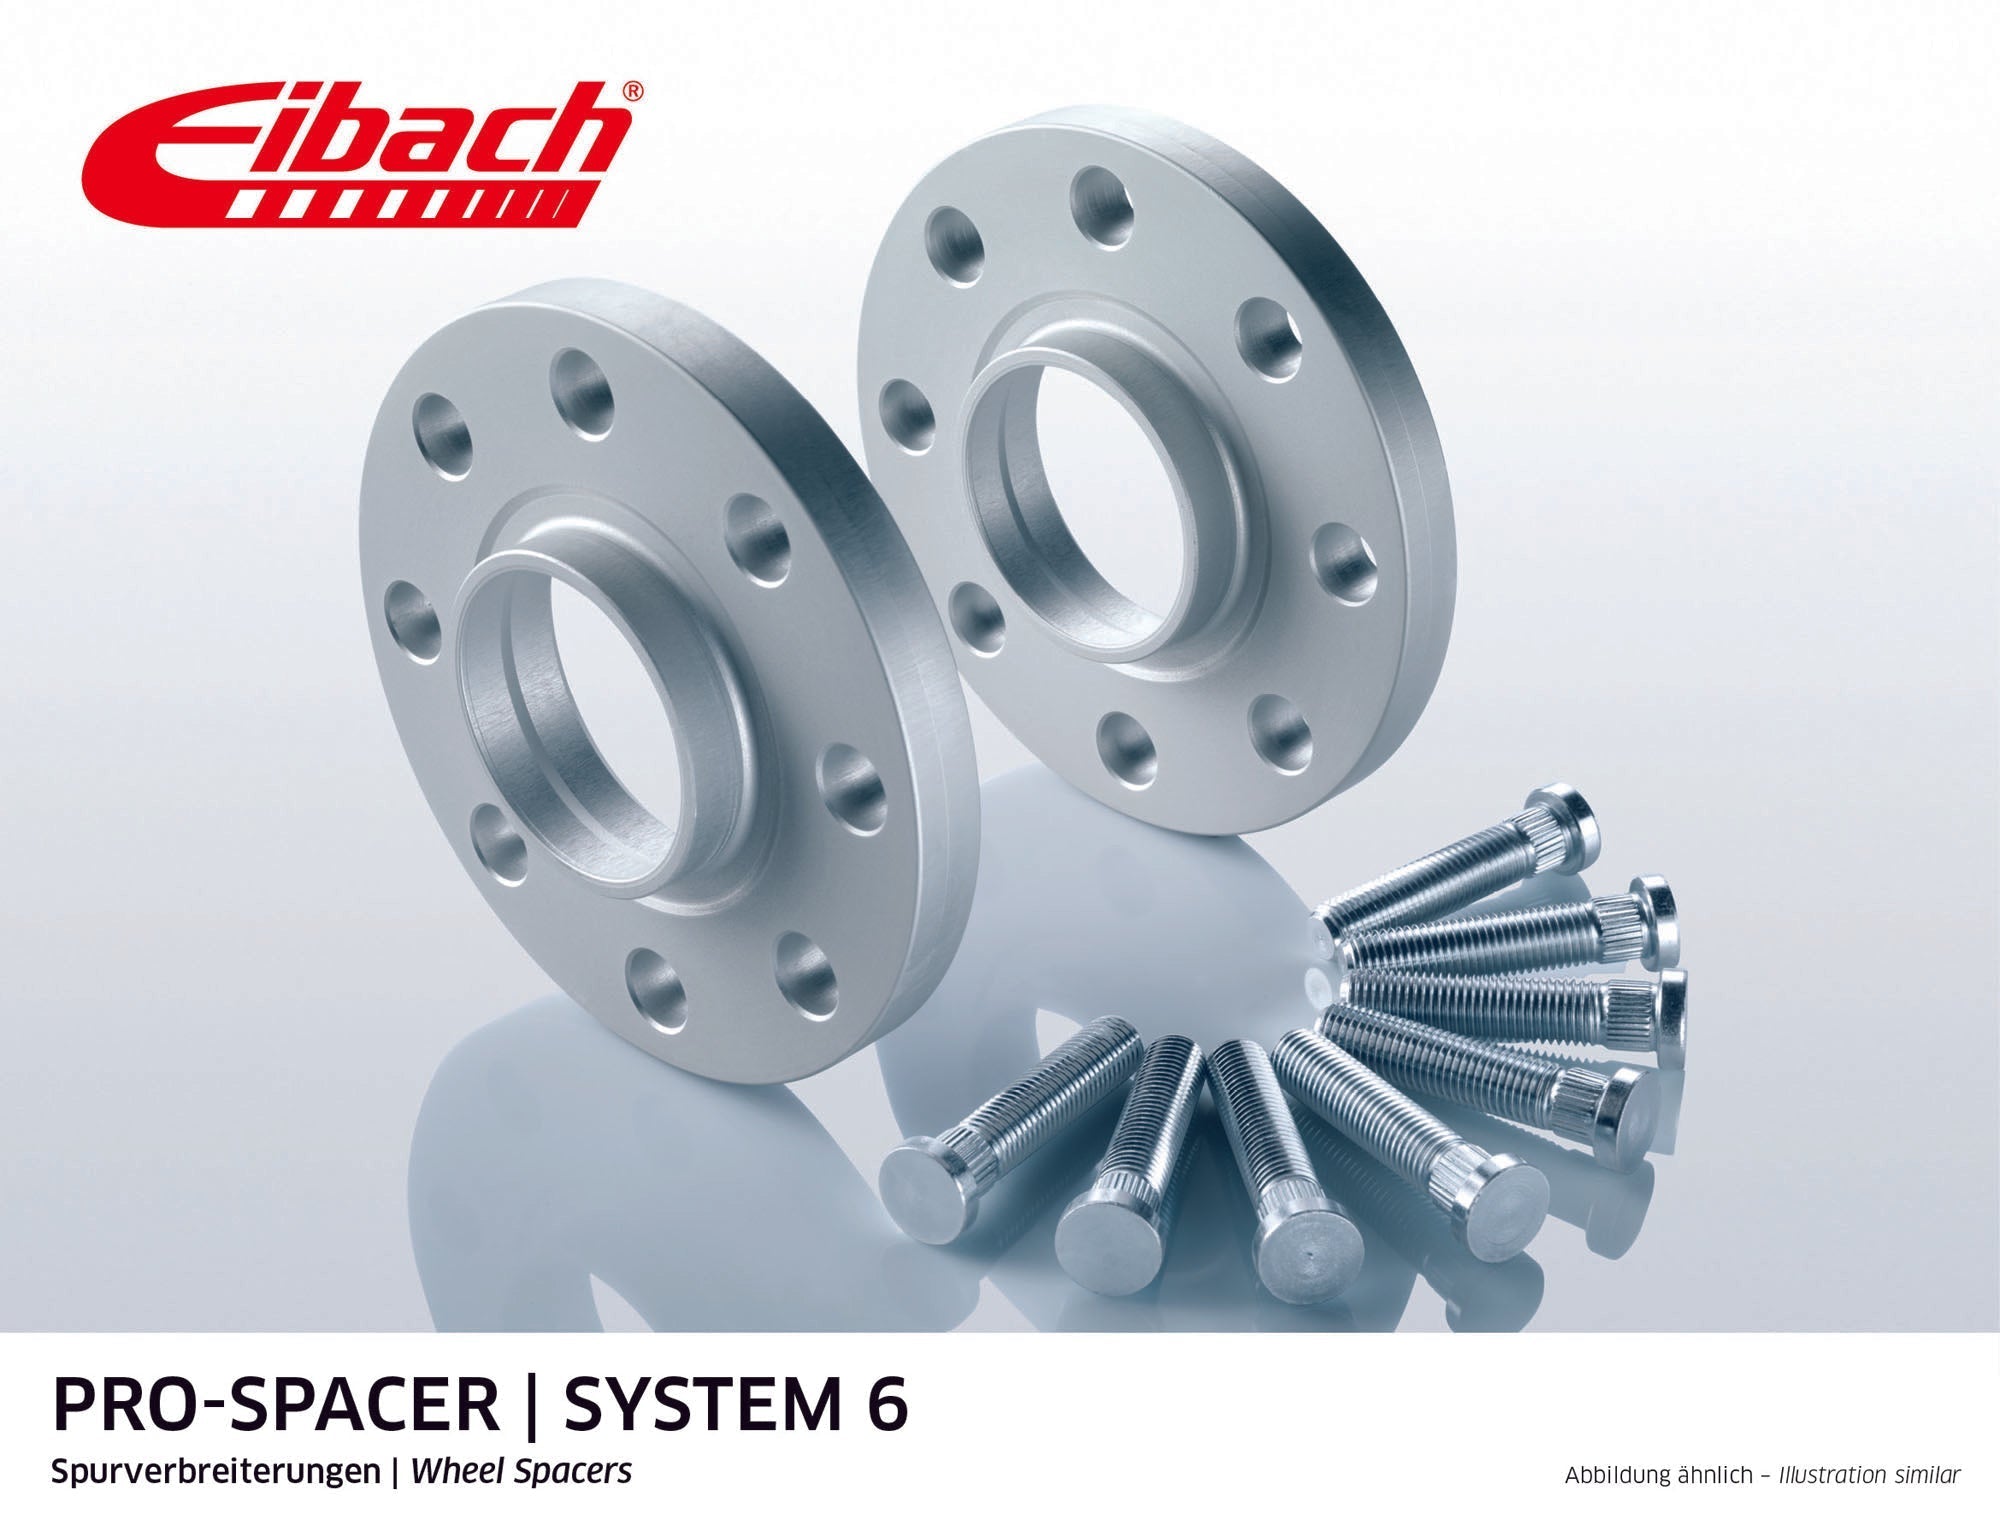 Eibach 15mm Pro-Spacer - Silver Anodized Wheel Spacer 959 1986-91 #S90-6-15-018